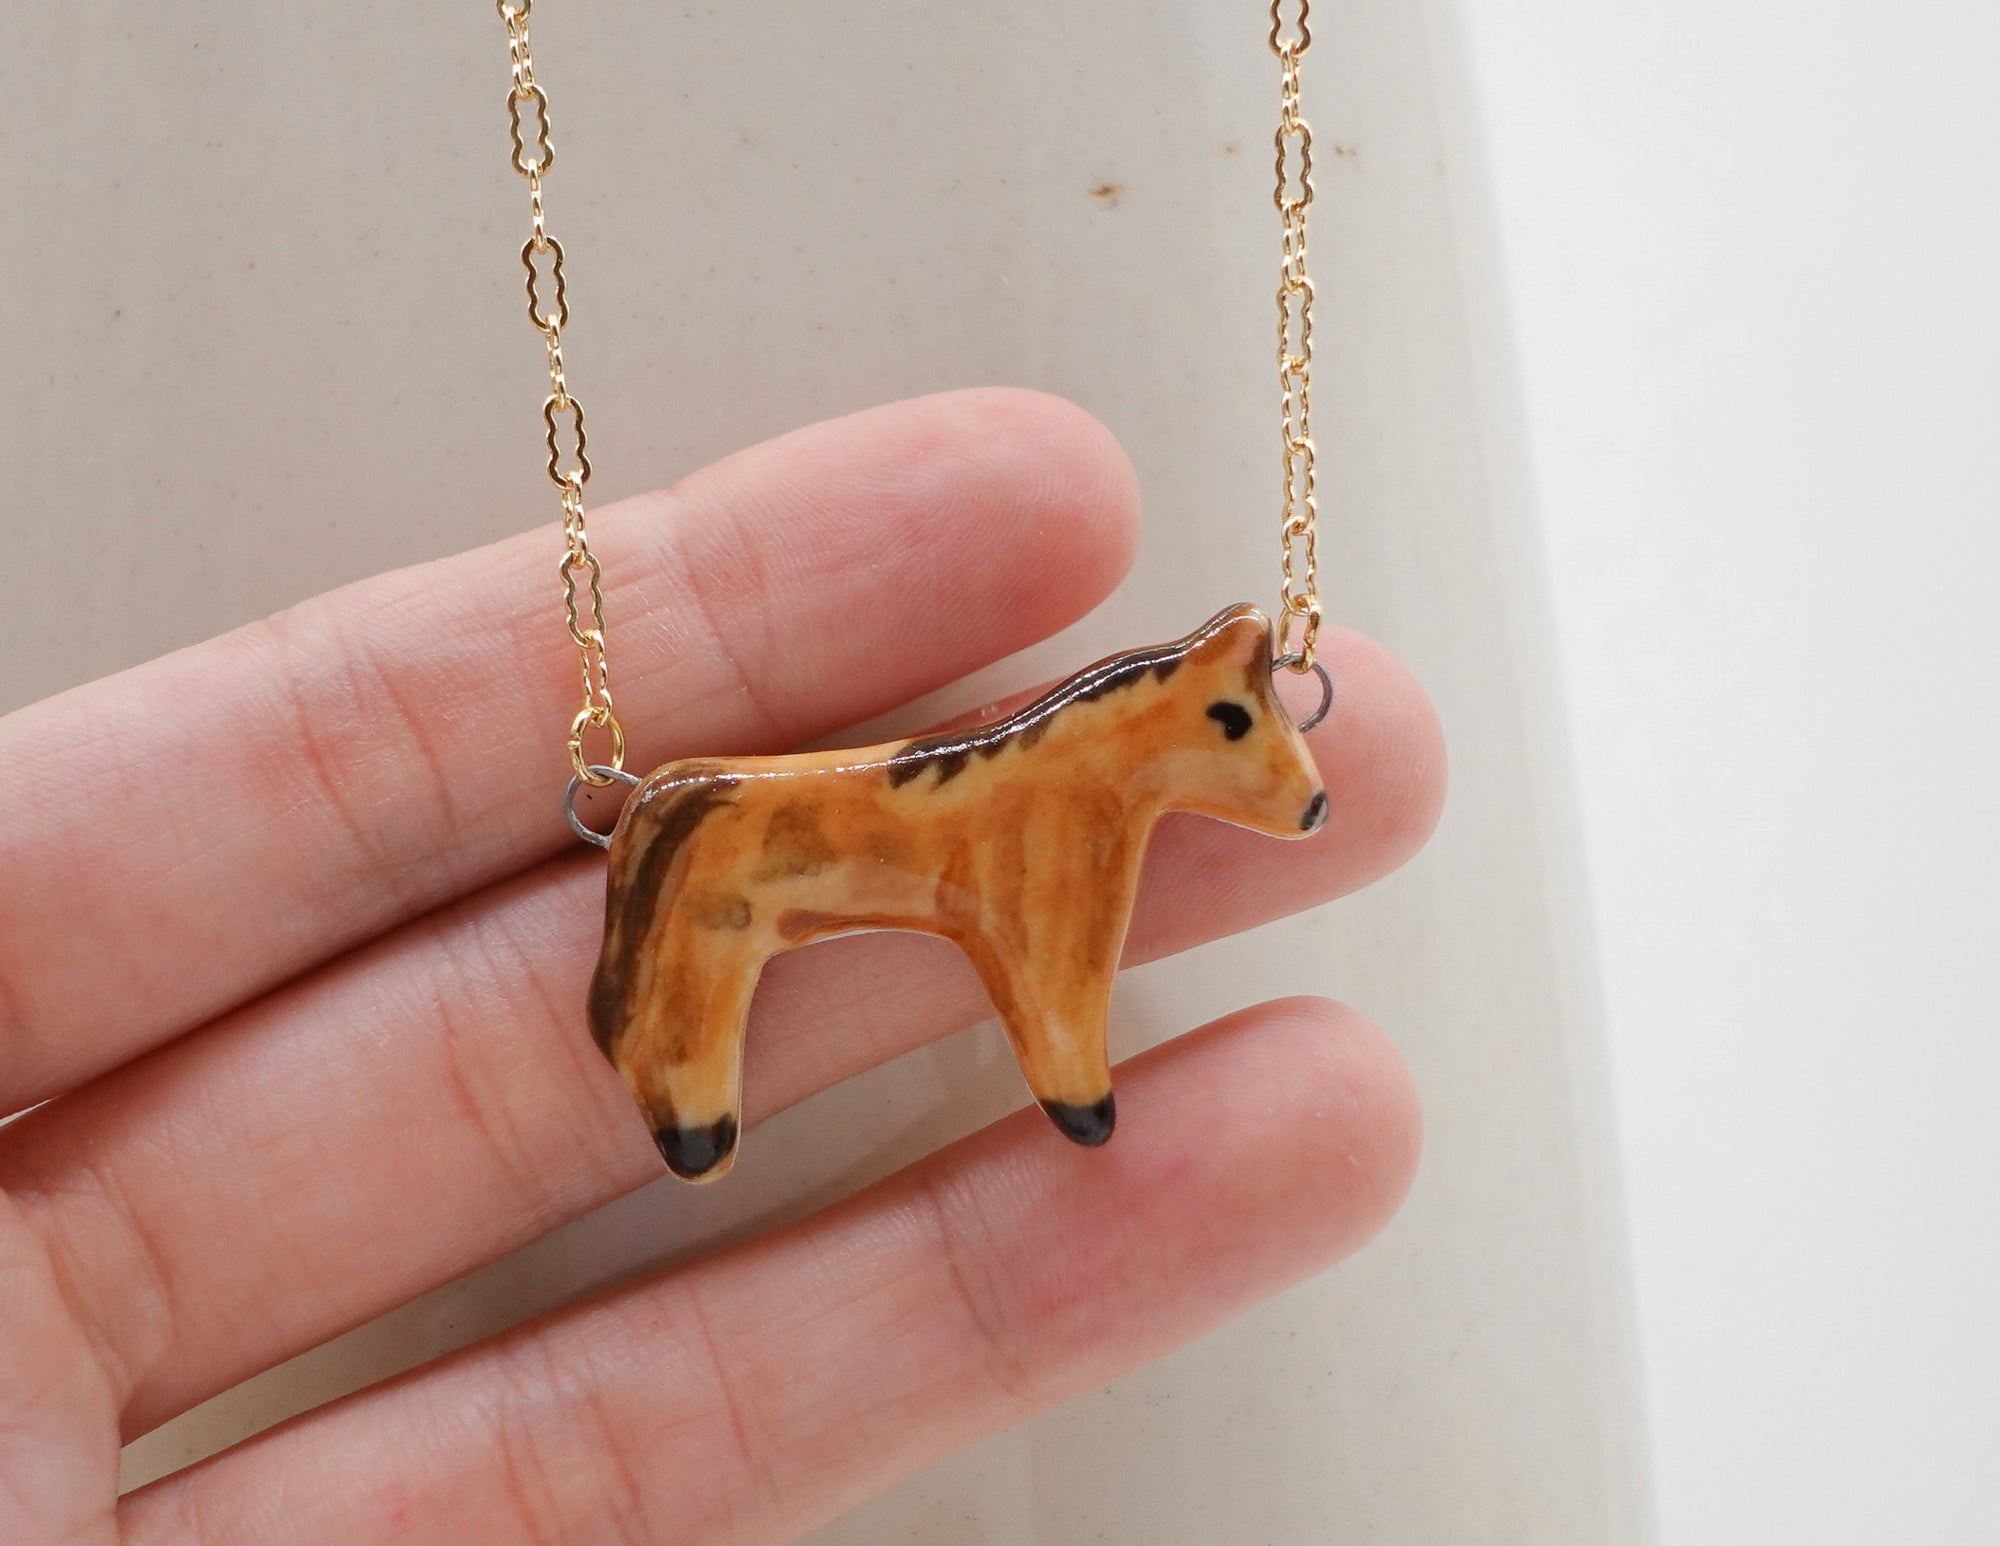 Thoroughbred Horse Necklace